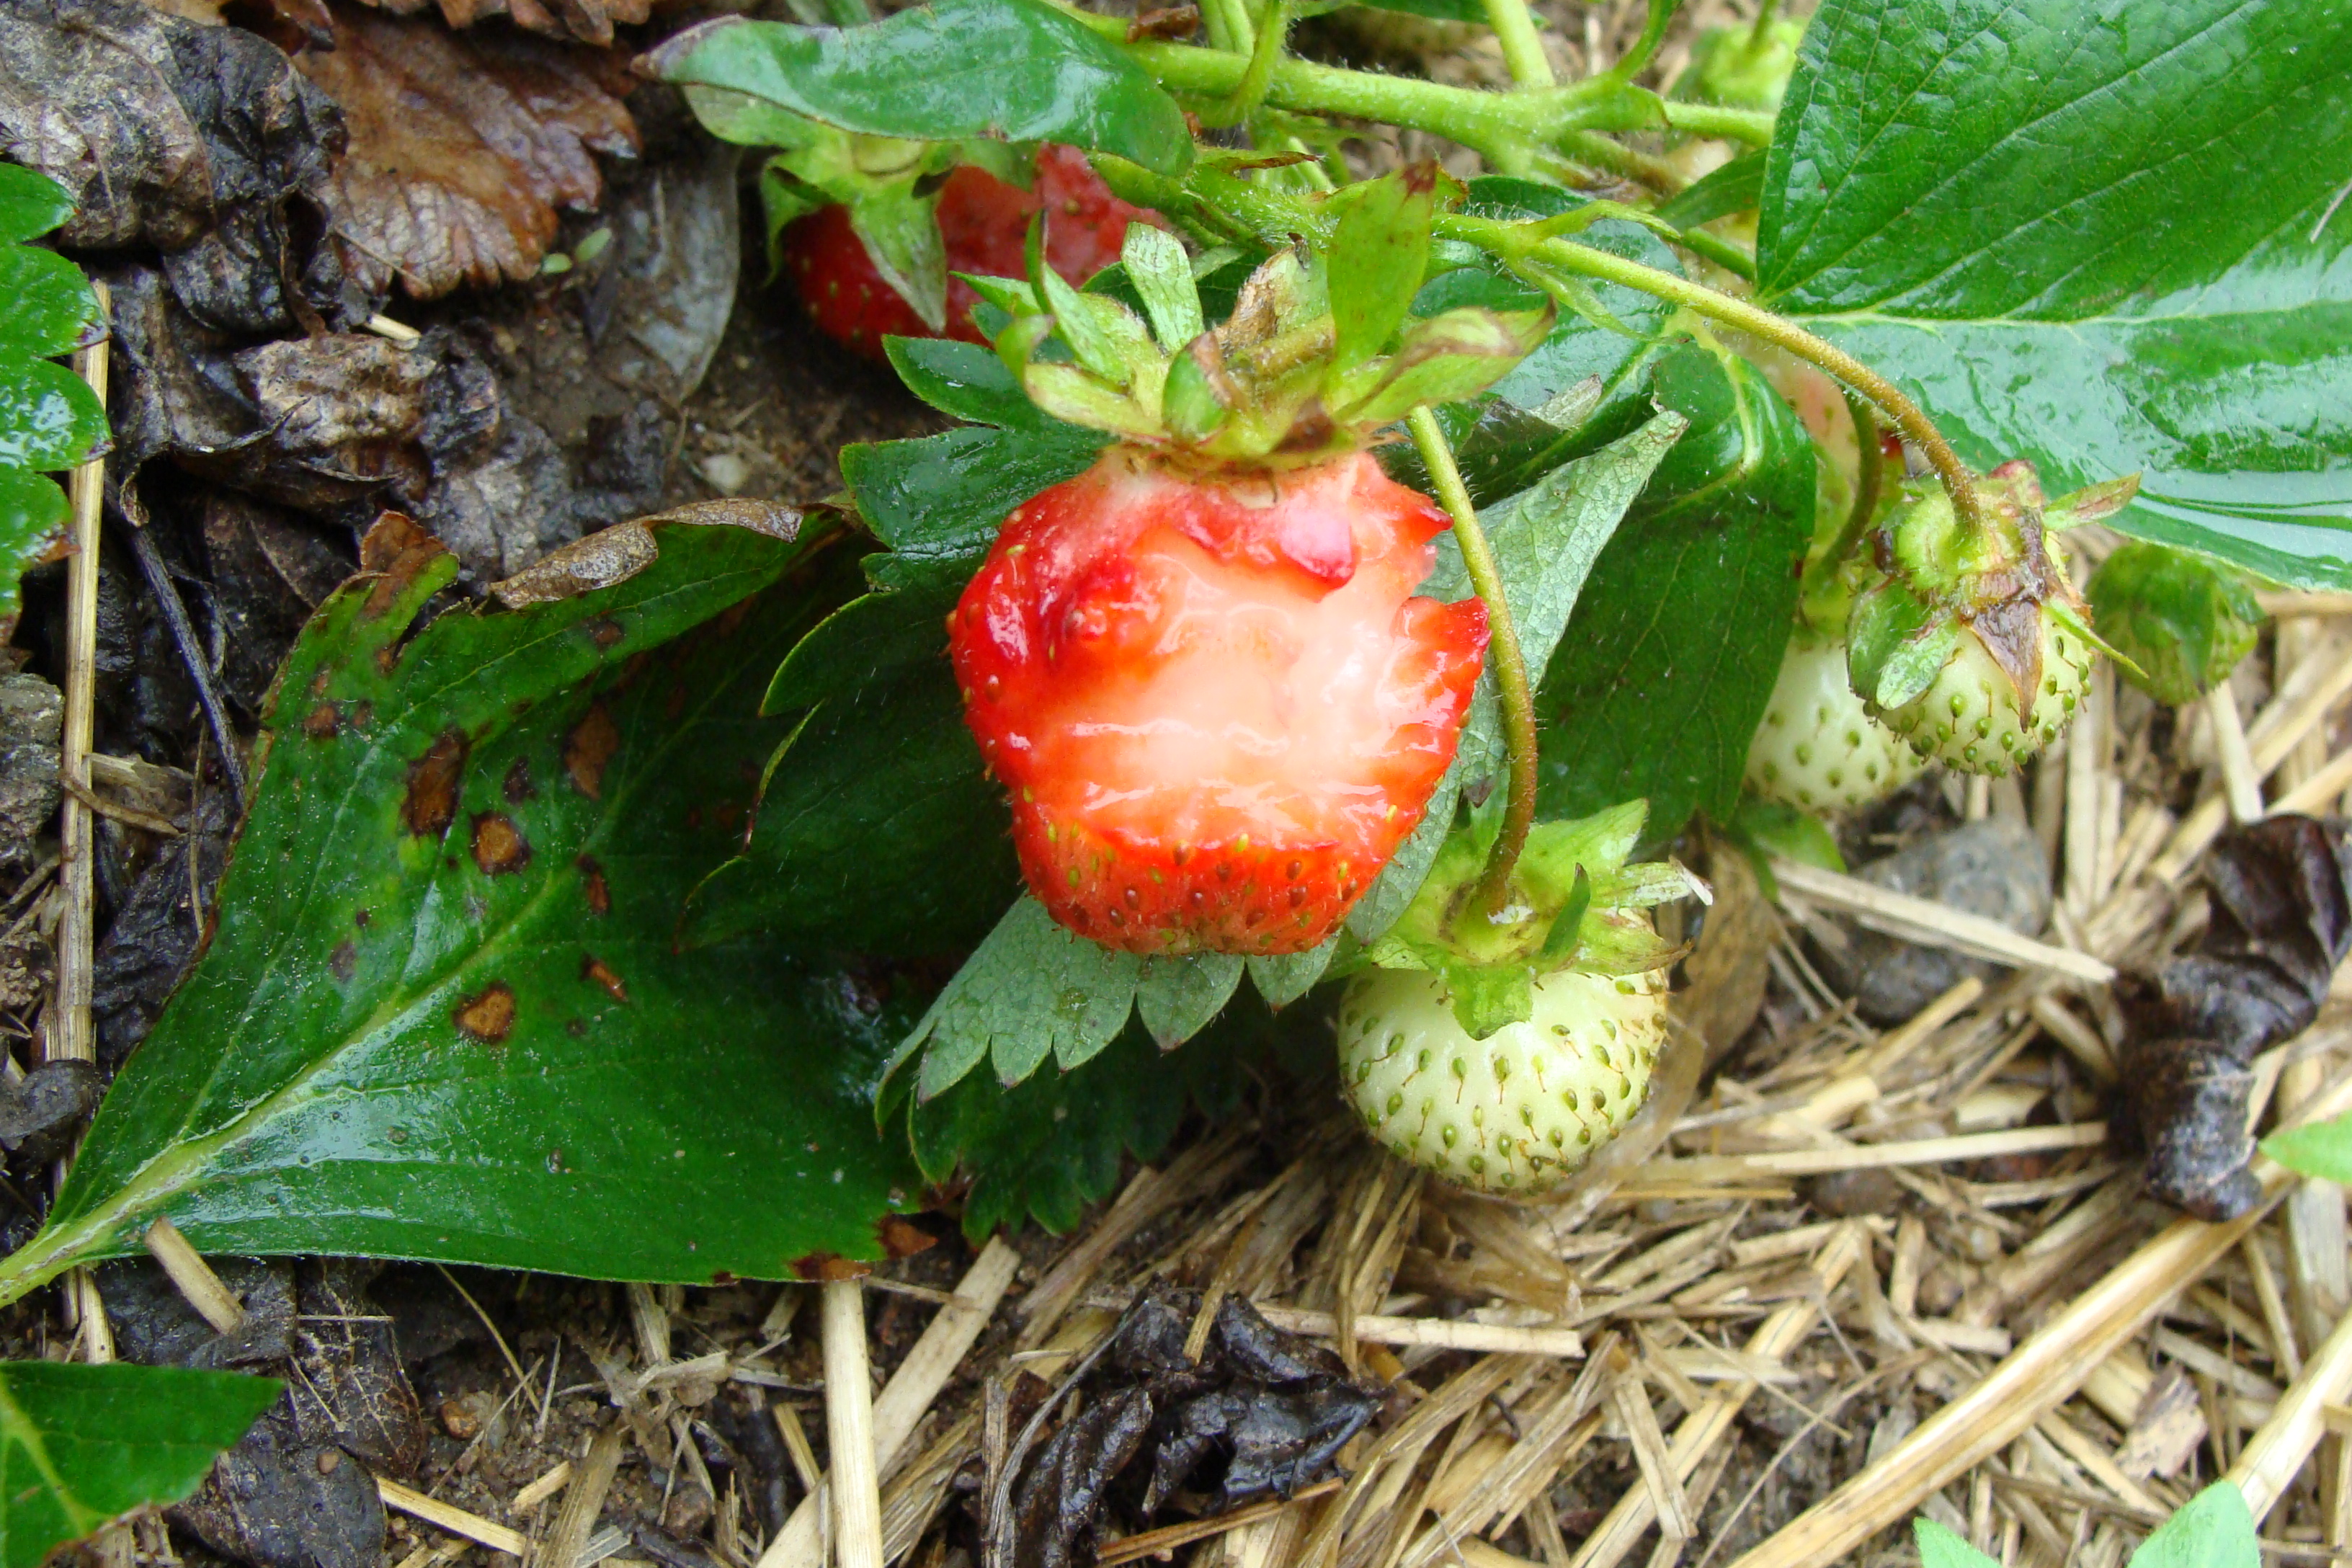 Bulletin #4268, Vegetables and Fruits for Health: Strawberries -  Cooperative Extension Publications - University of Maine Cooperative  Extension